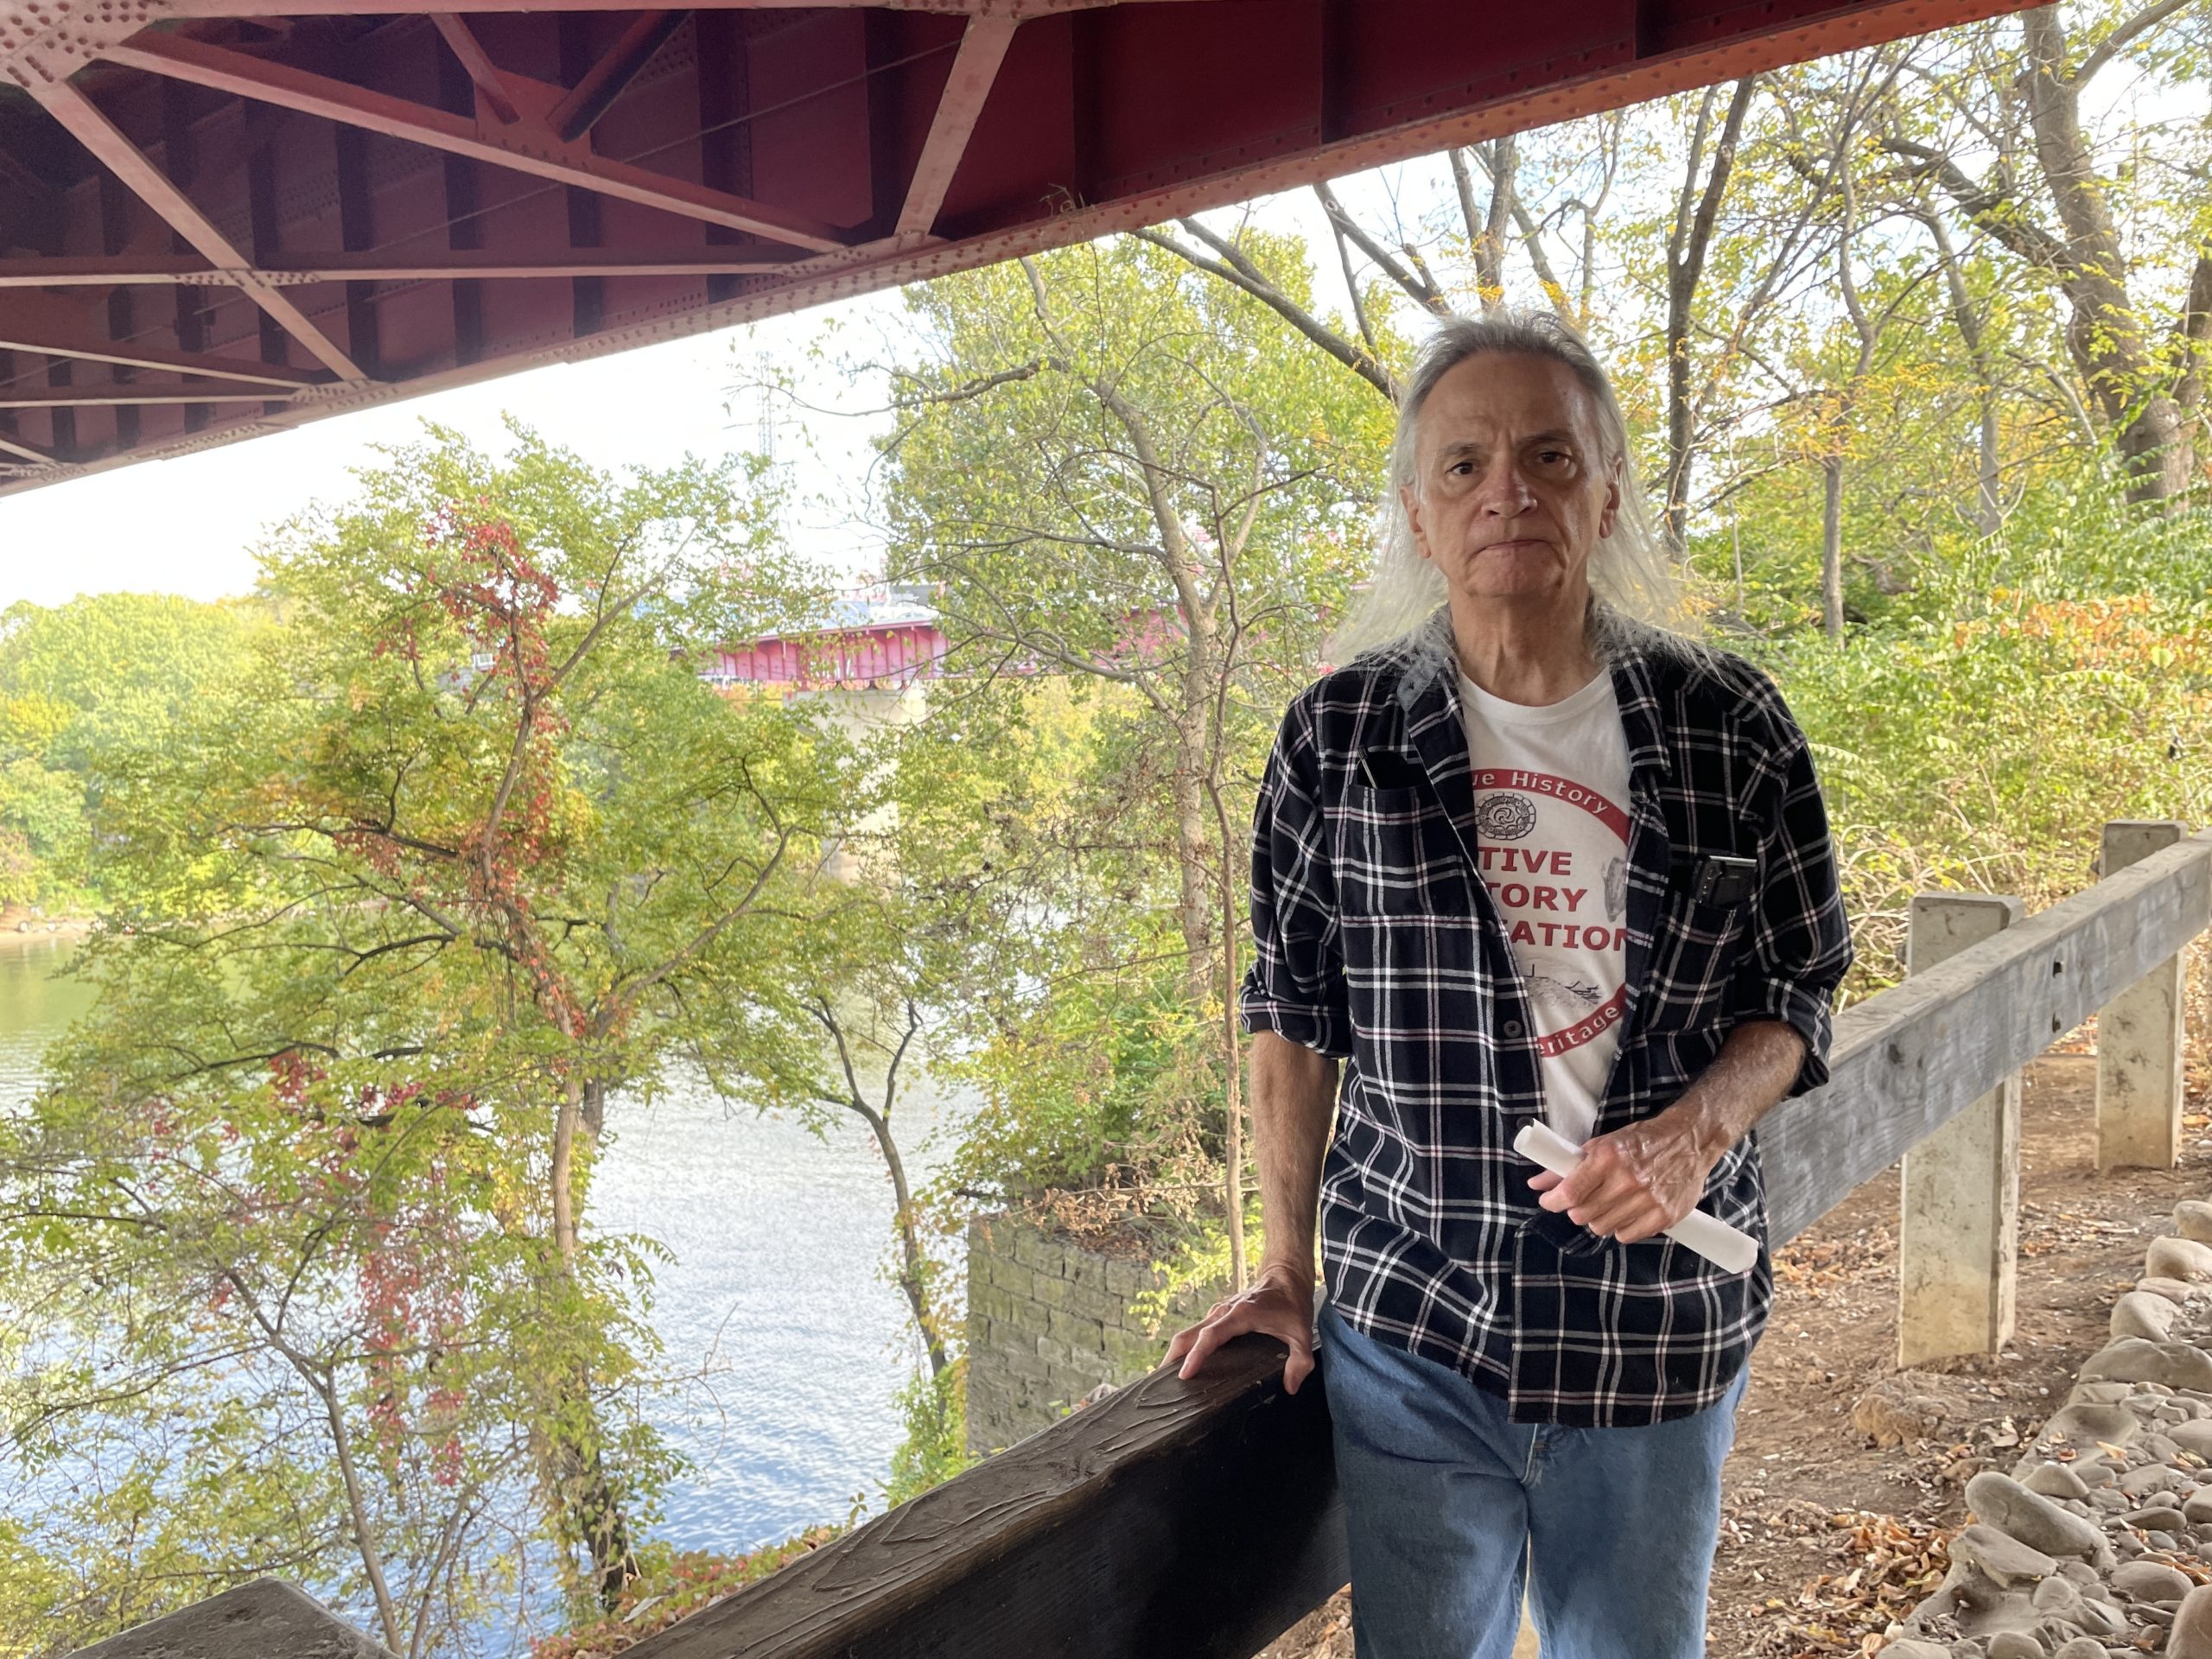 Native American historian Toye Heape, wearing a plaid shirt and a Native History Association T-shirt, stands in front of a railing; in the near distance, there is stone structure that was once part of a bridge.